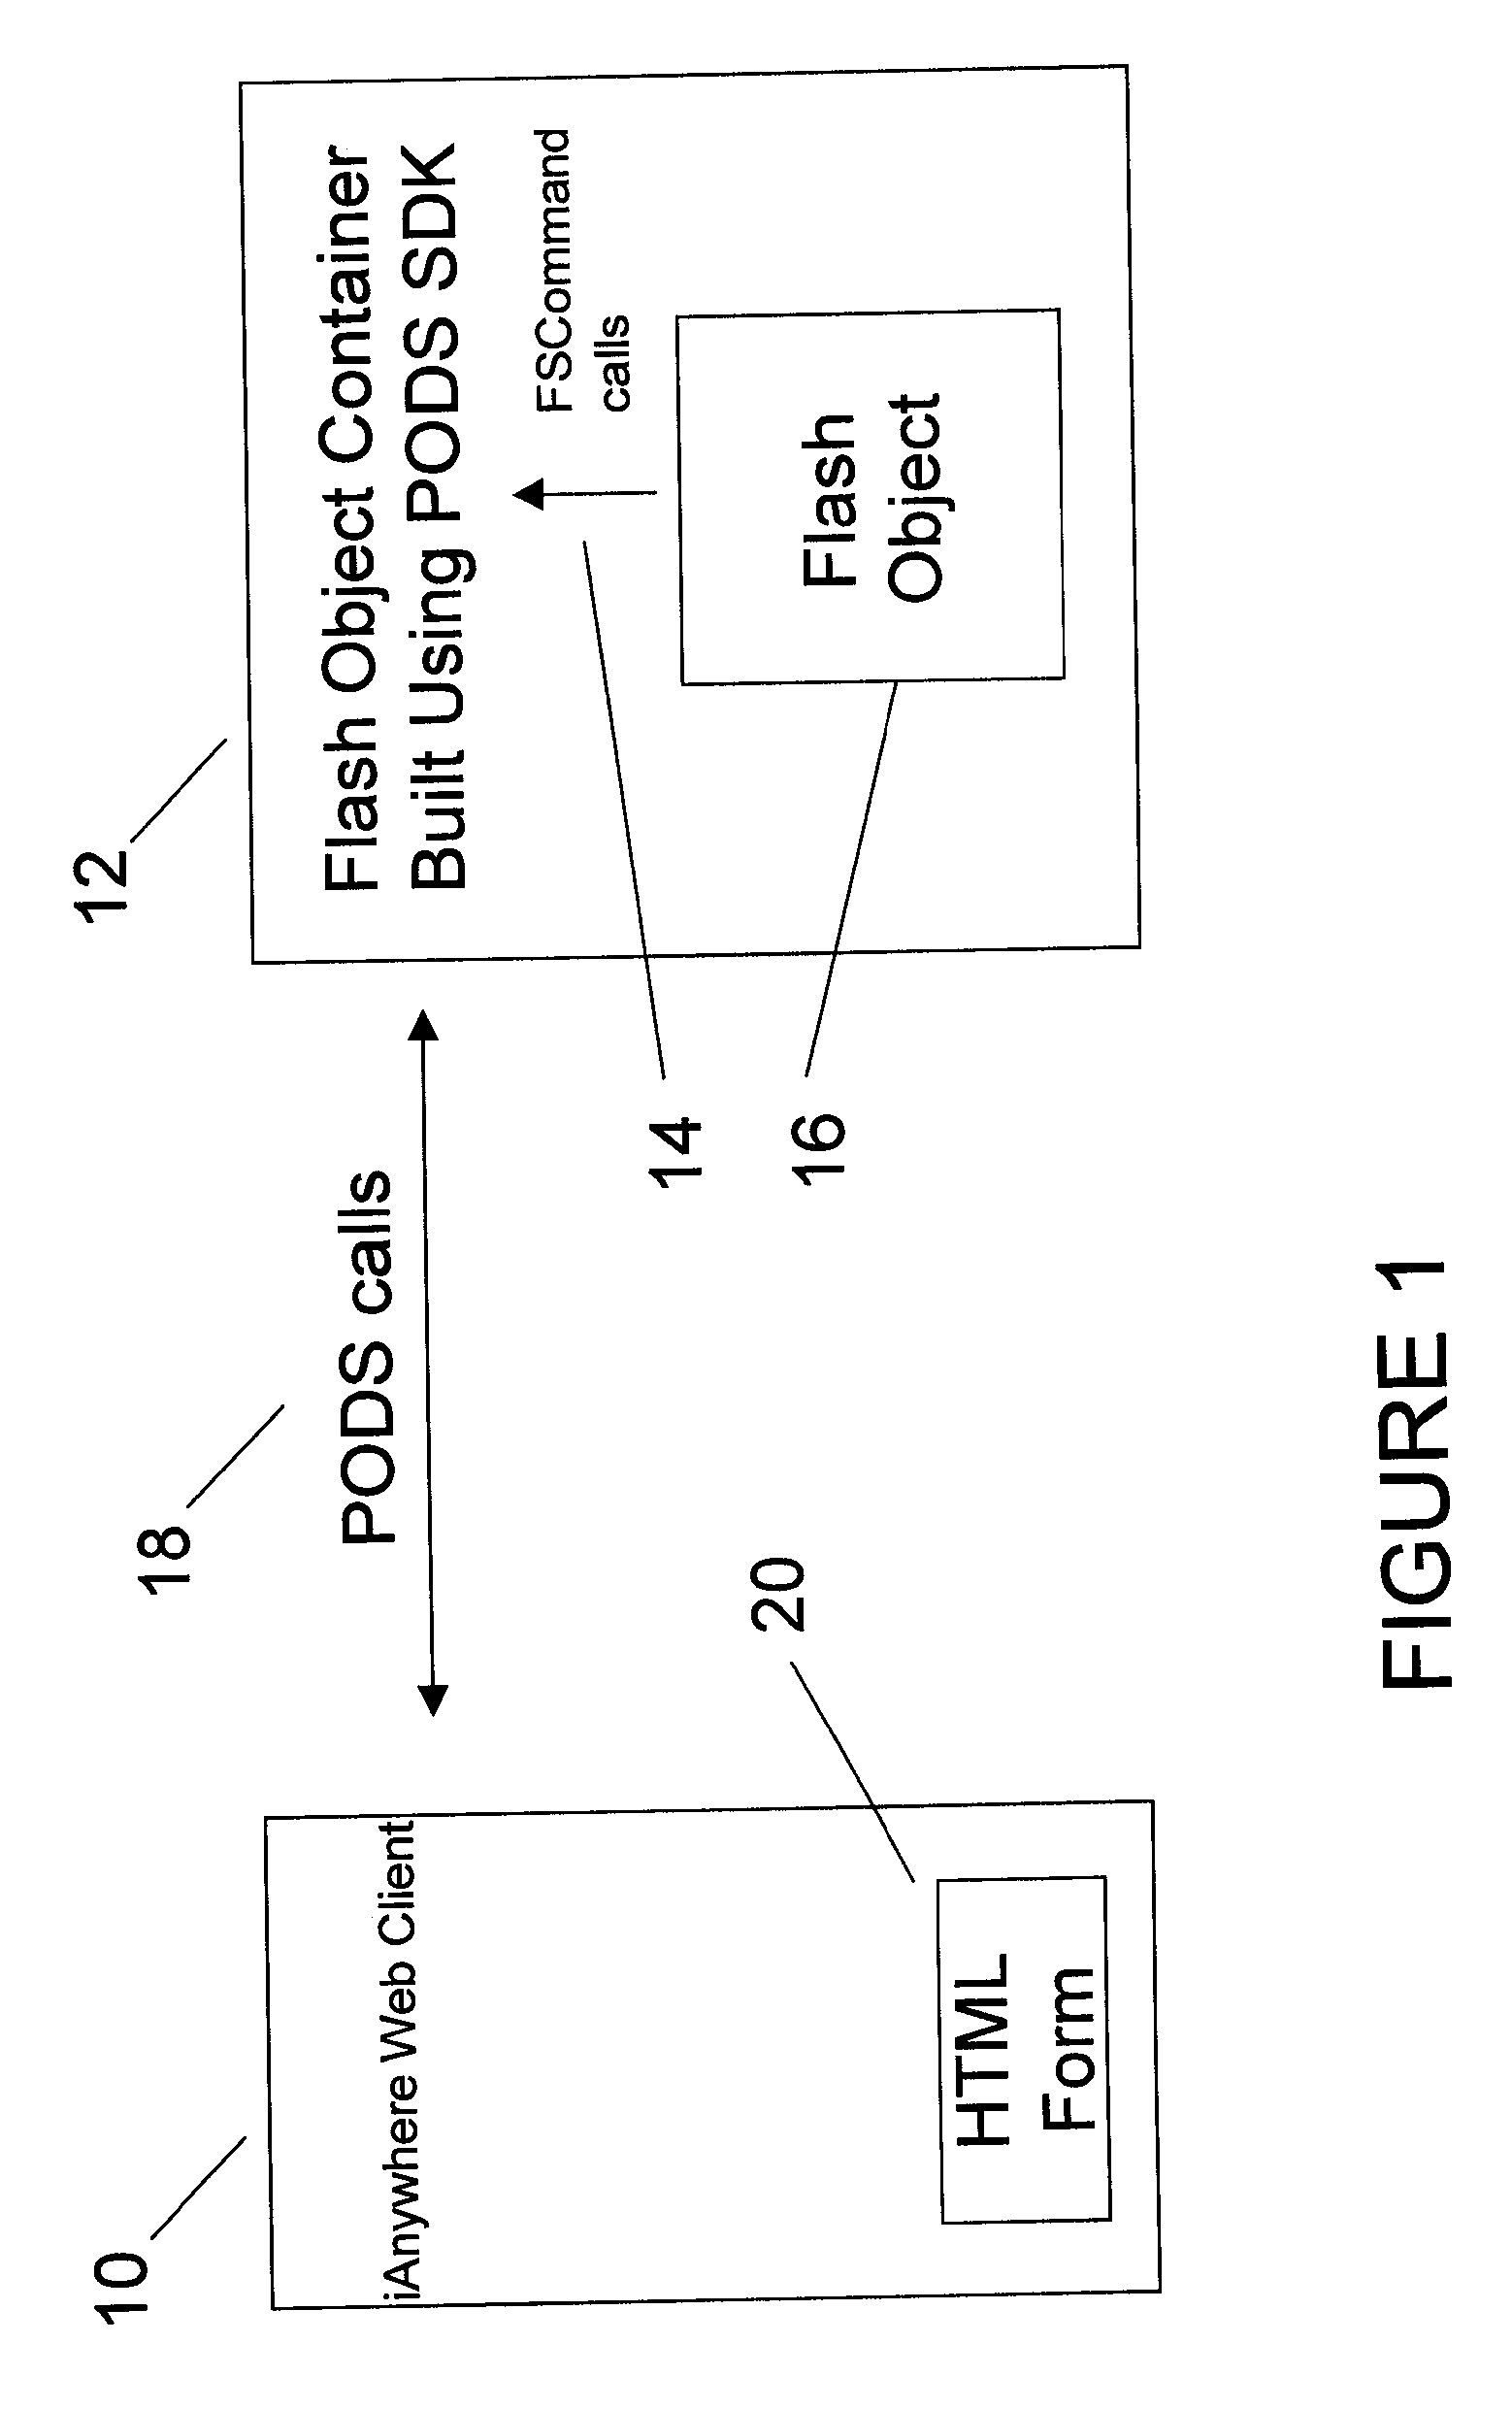 Method of and system for data interaction in a web-based database application environment